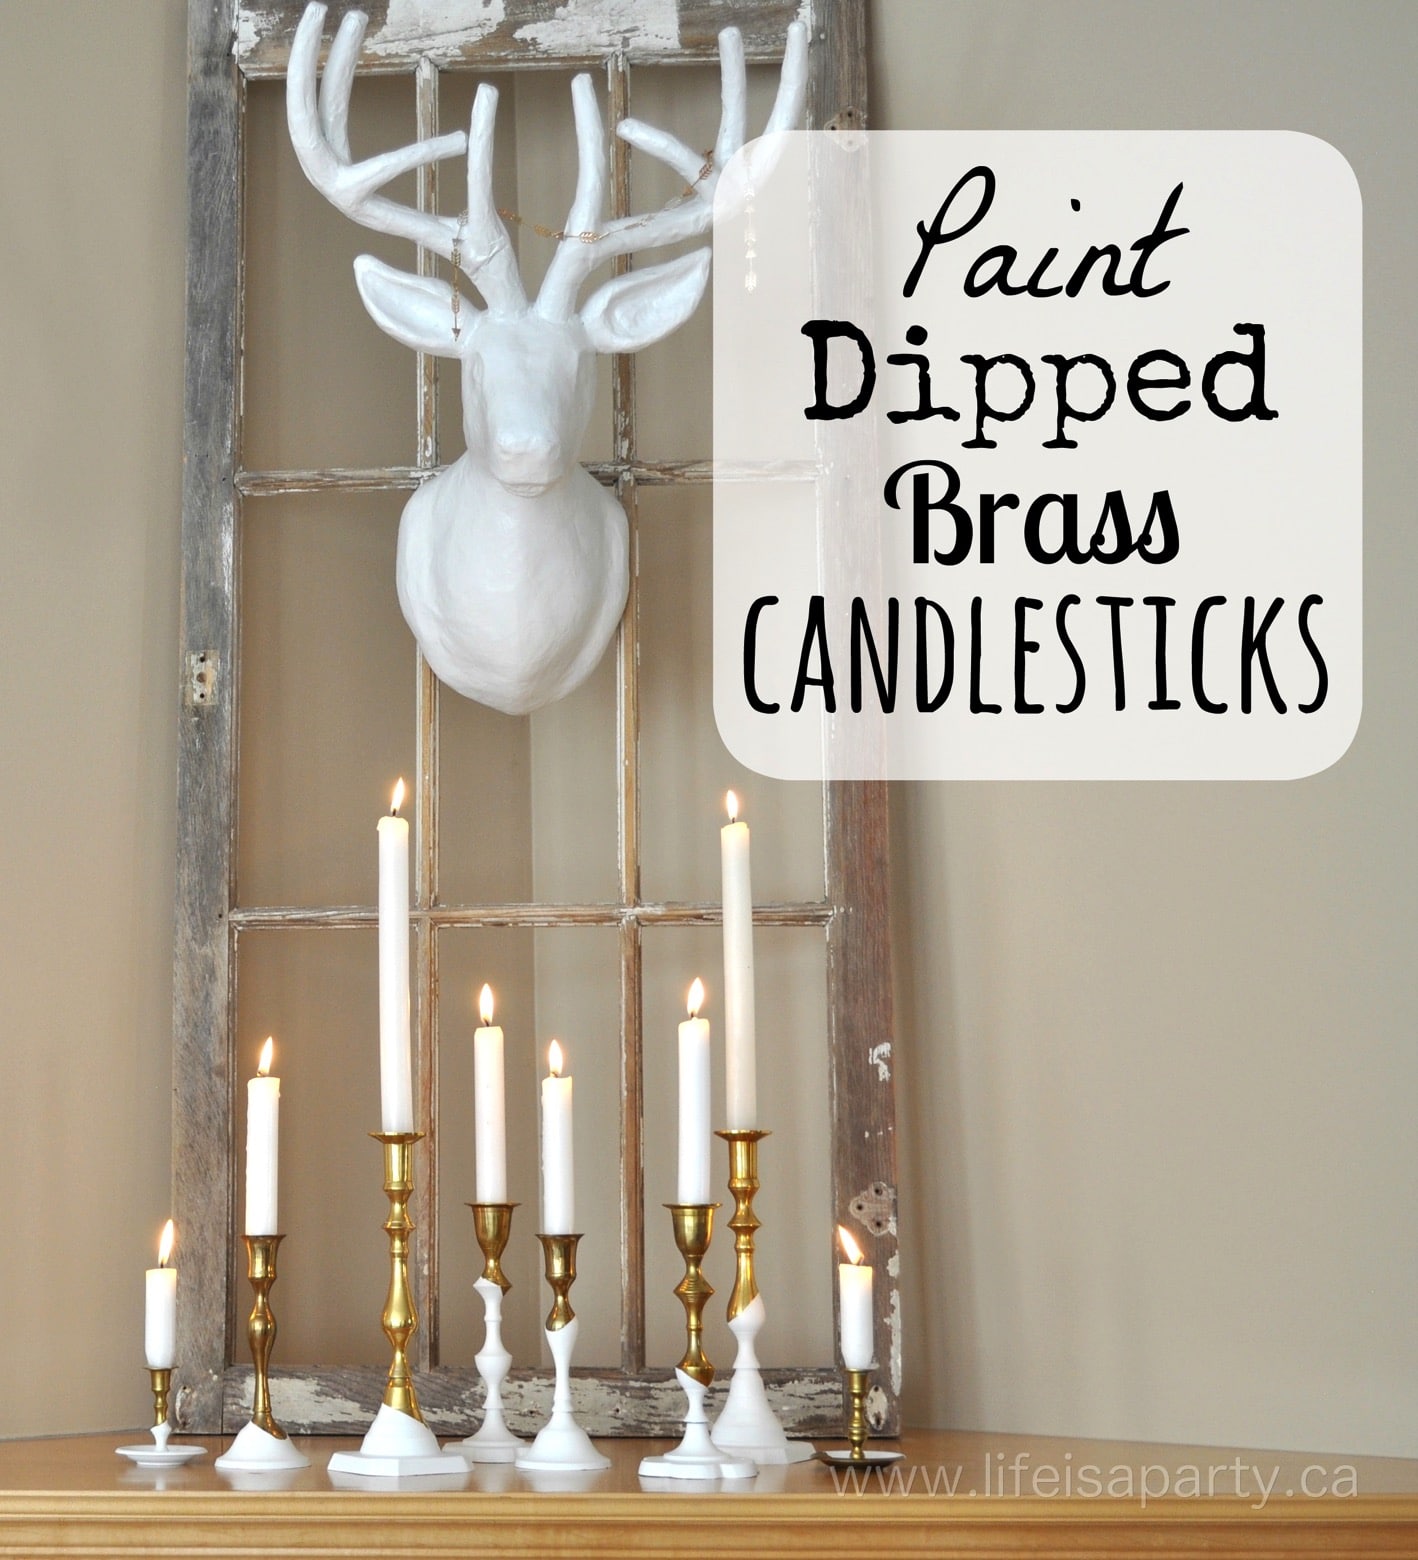 Paint Dipped Brass Candlestick Holders: upcycle your old brass by painting them for a modern look with this fun and easy candle holder craft.